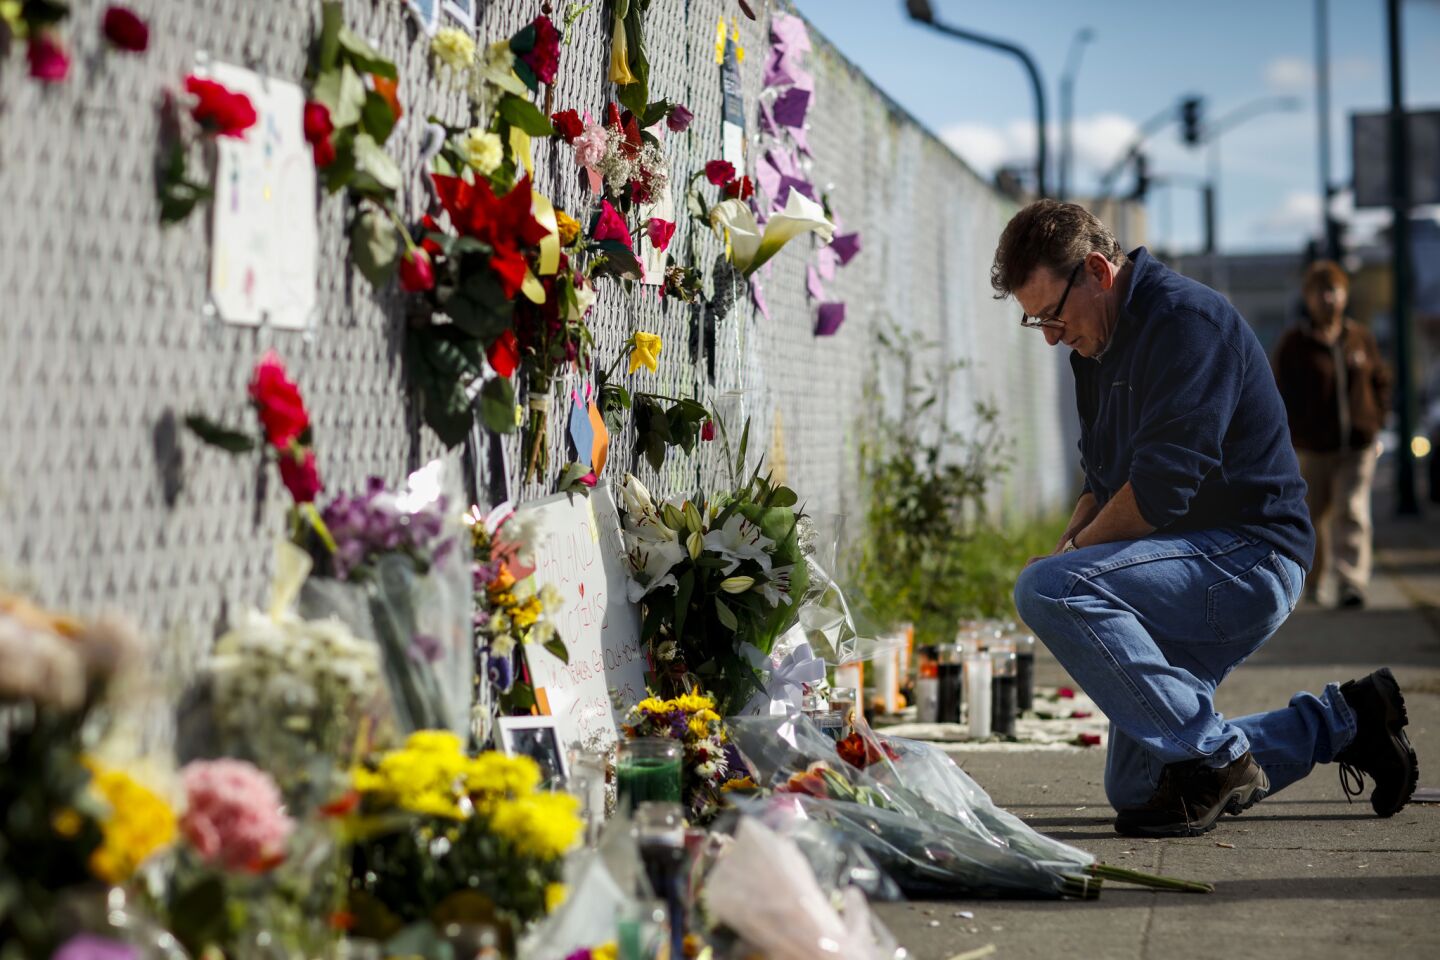 Flowers, candles and notes, memorializing those killed and injured in the "Ghostship" warehouse fire that burned and killed at least 36 people in the Oakland neighborhood of Fruitvale.